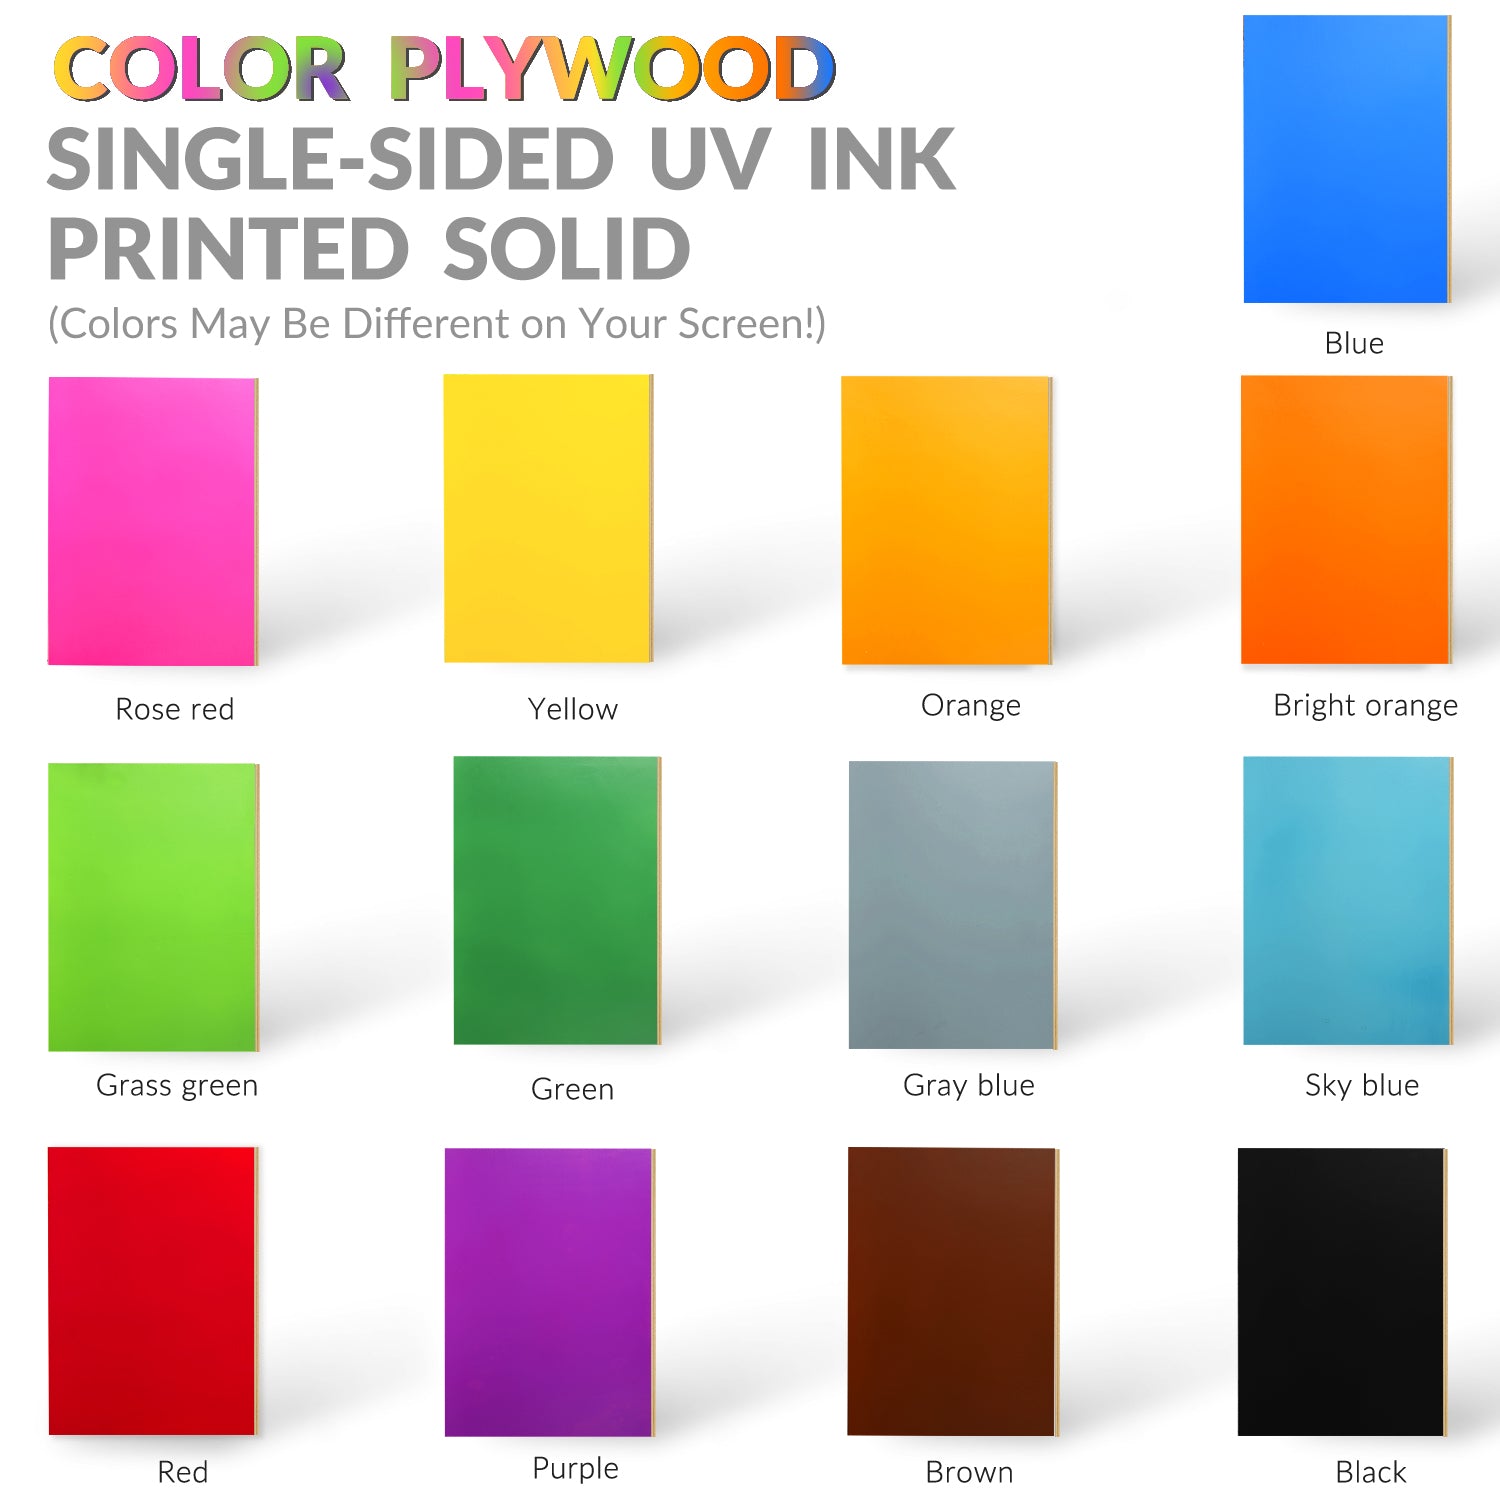 Single-sided UV Ink Printed Solid Color Plywood